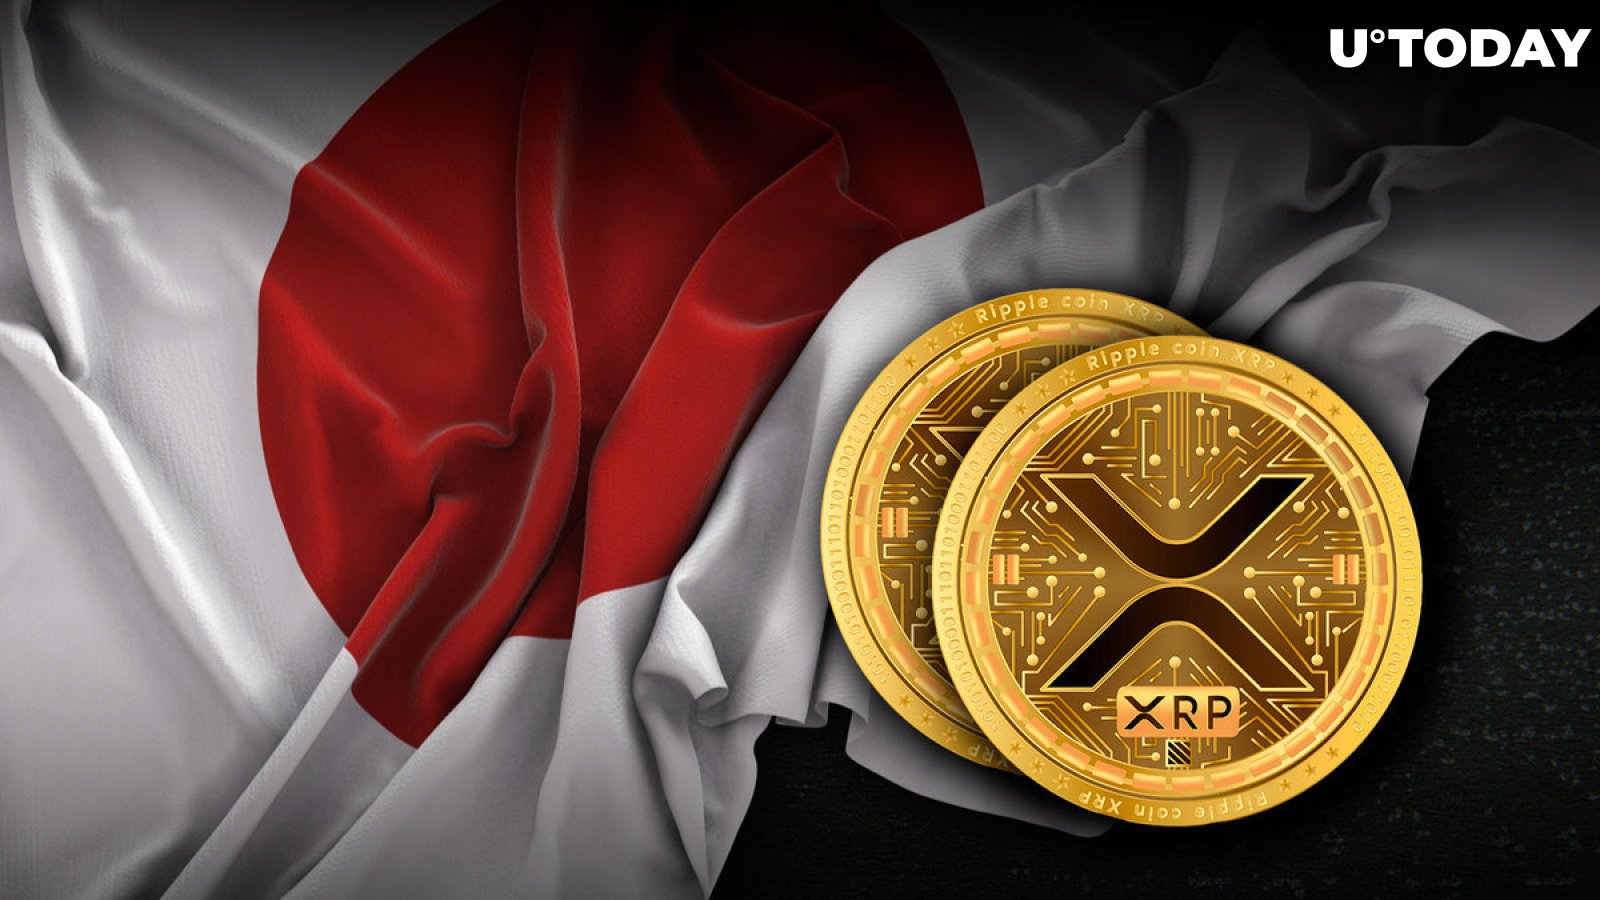 XRP: Major Japanese Crypto Exchange Adds Exciting New XRP Trading Pair